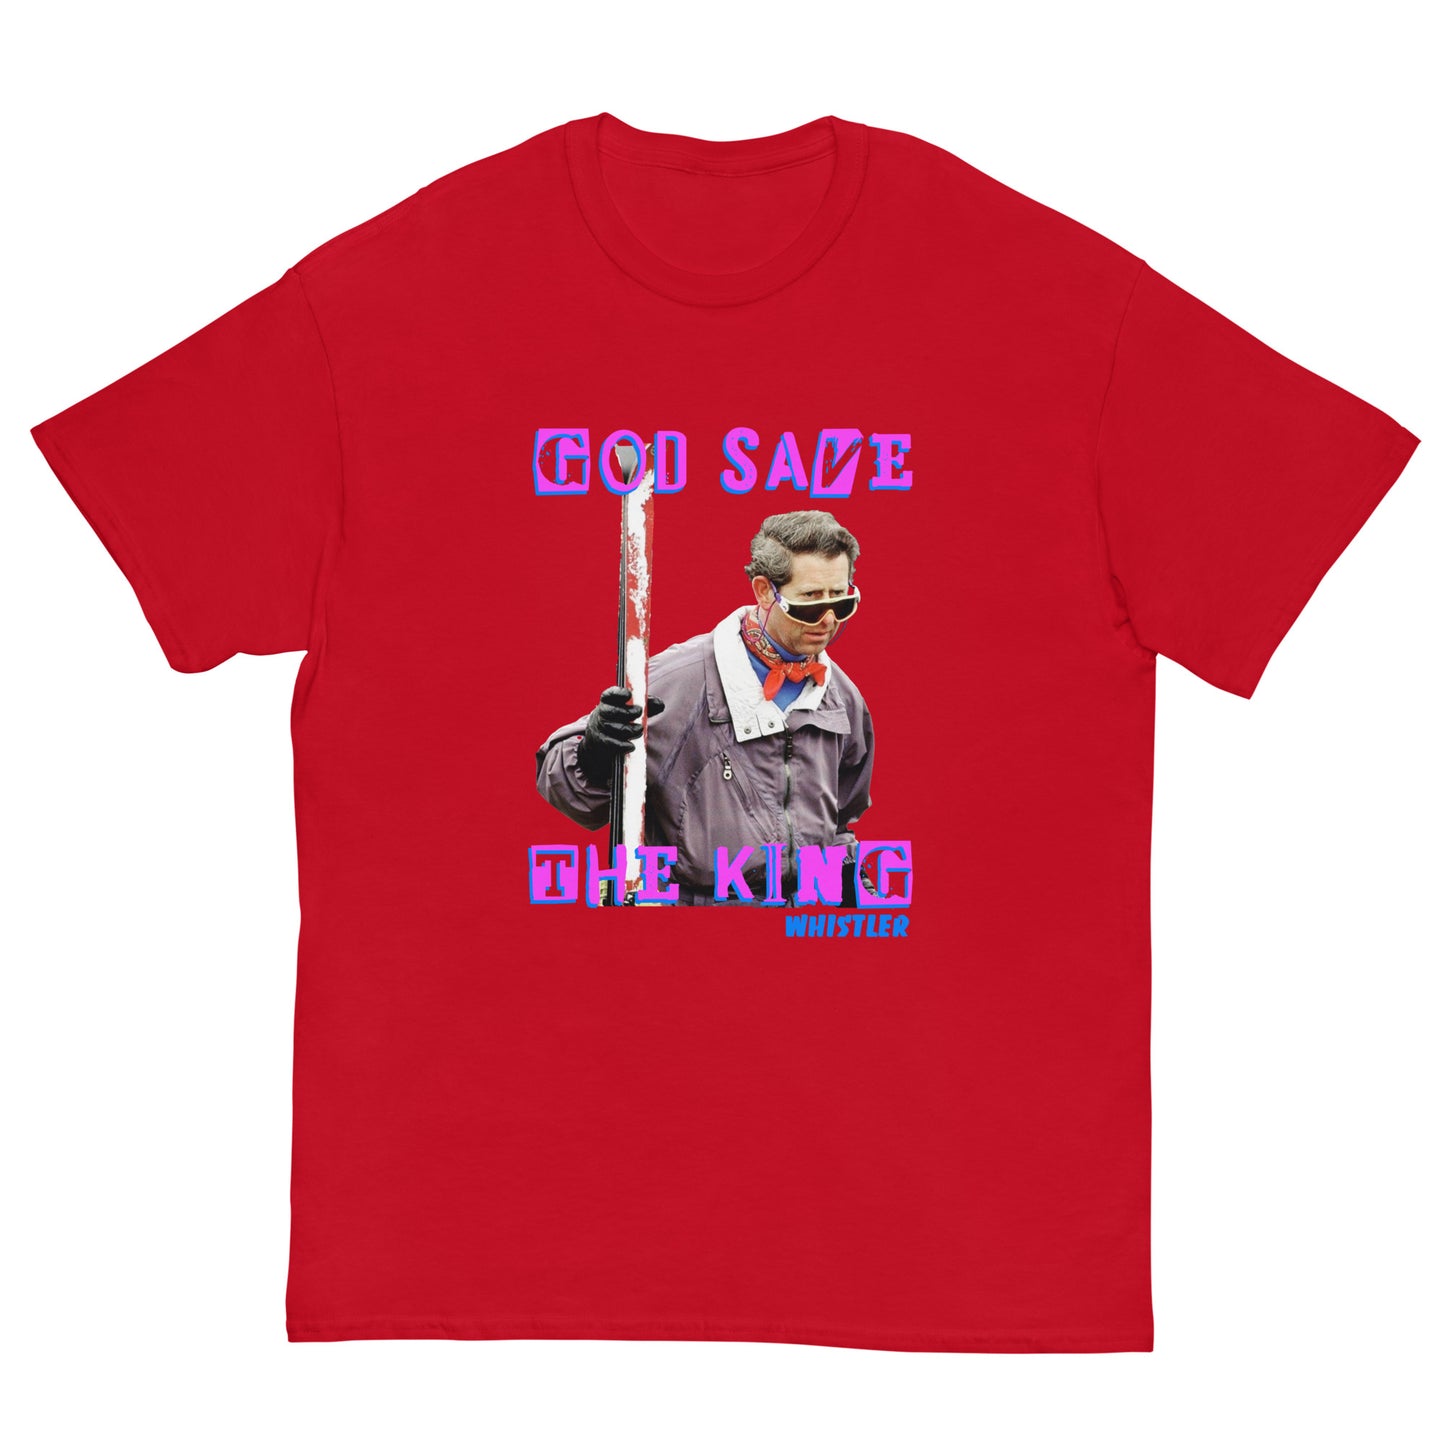 printed t-shirt god save the king whistler red